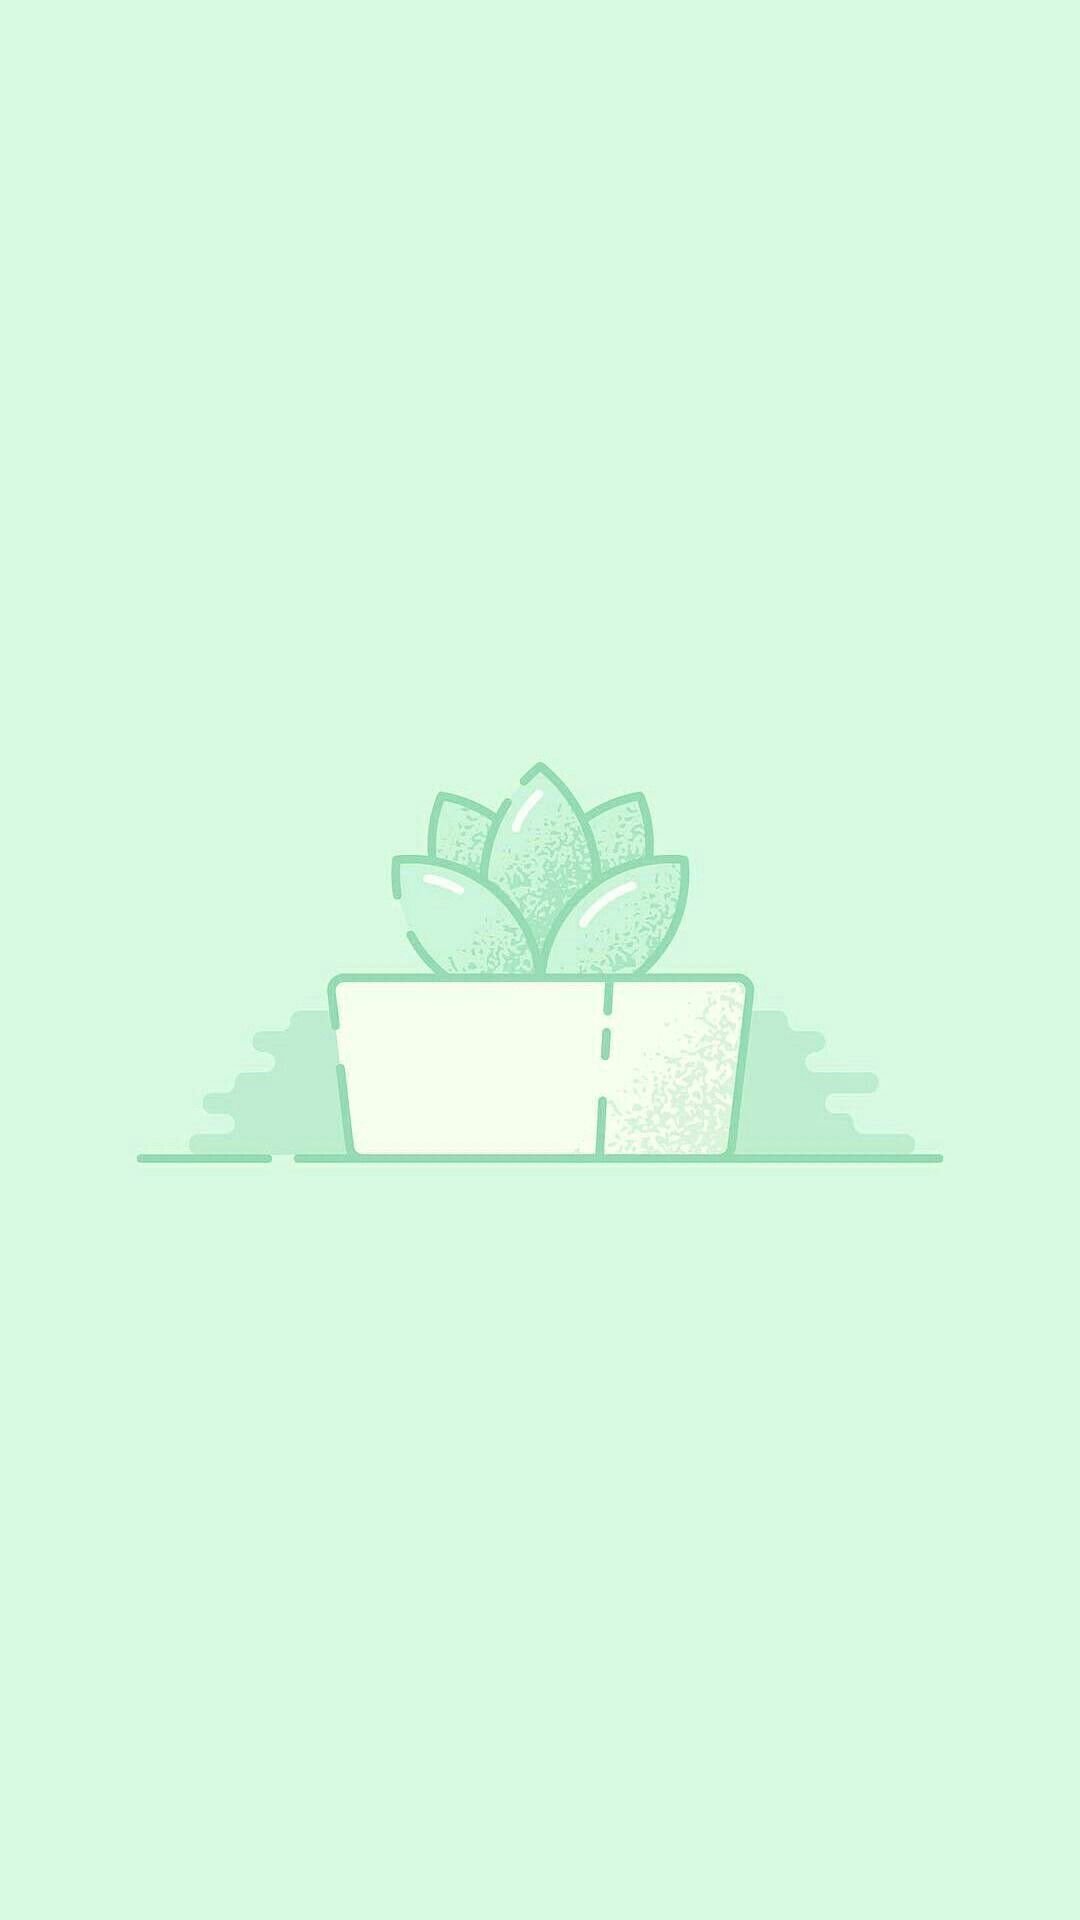 A green plant in the corner of an image - Mint green, pastel green